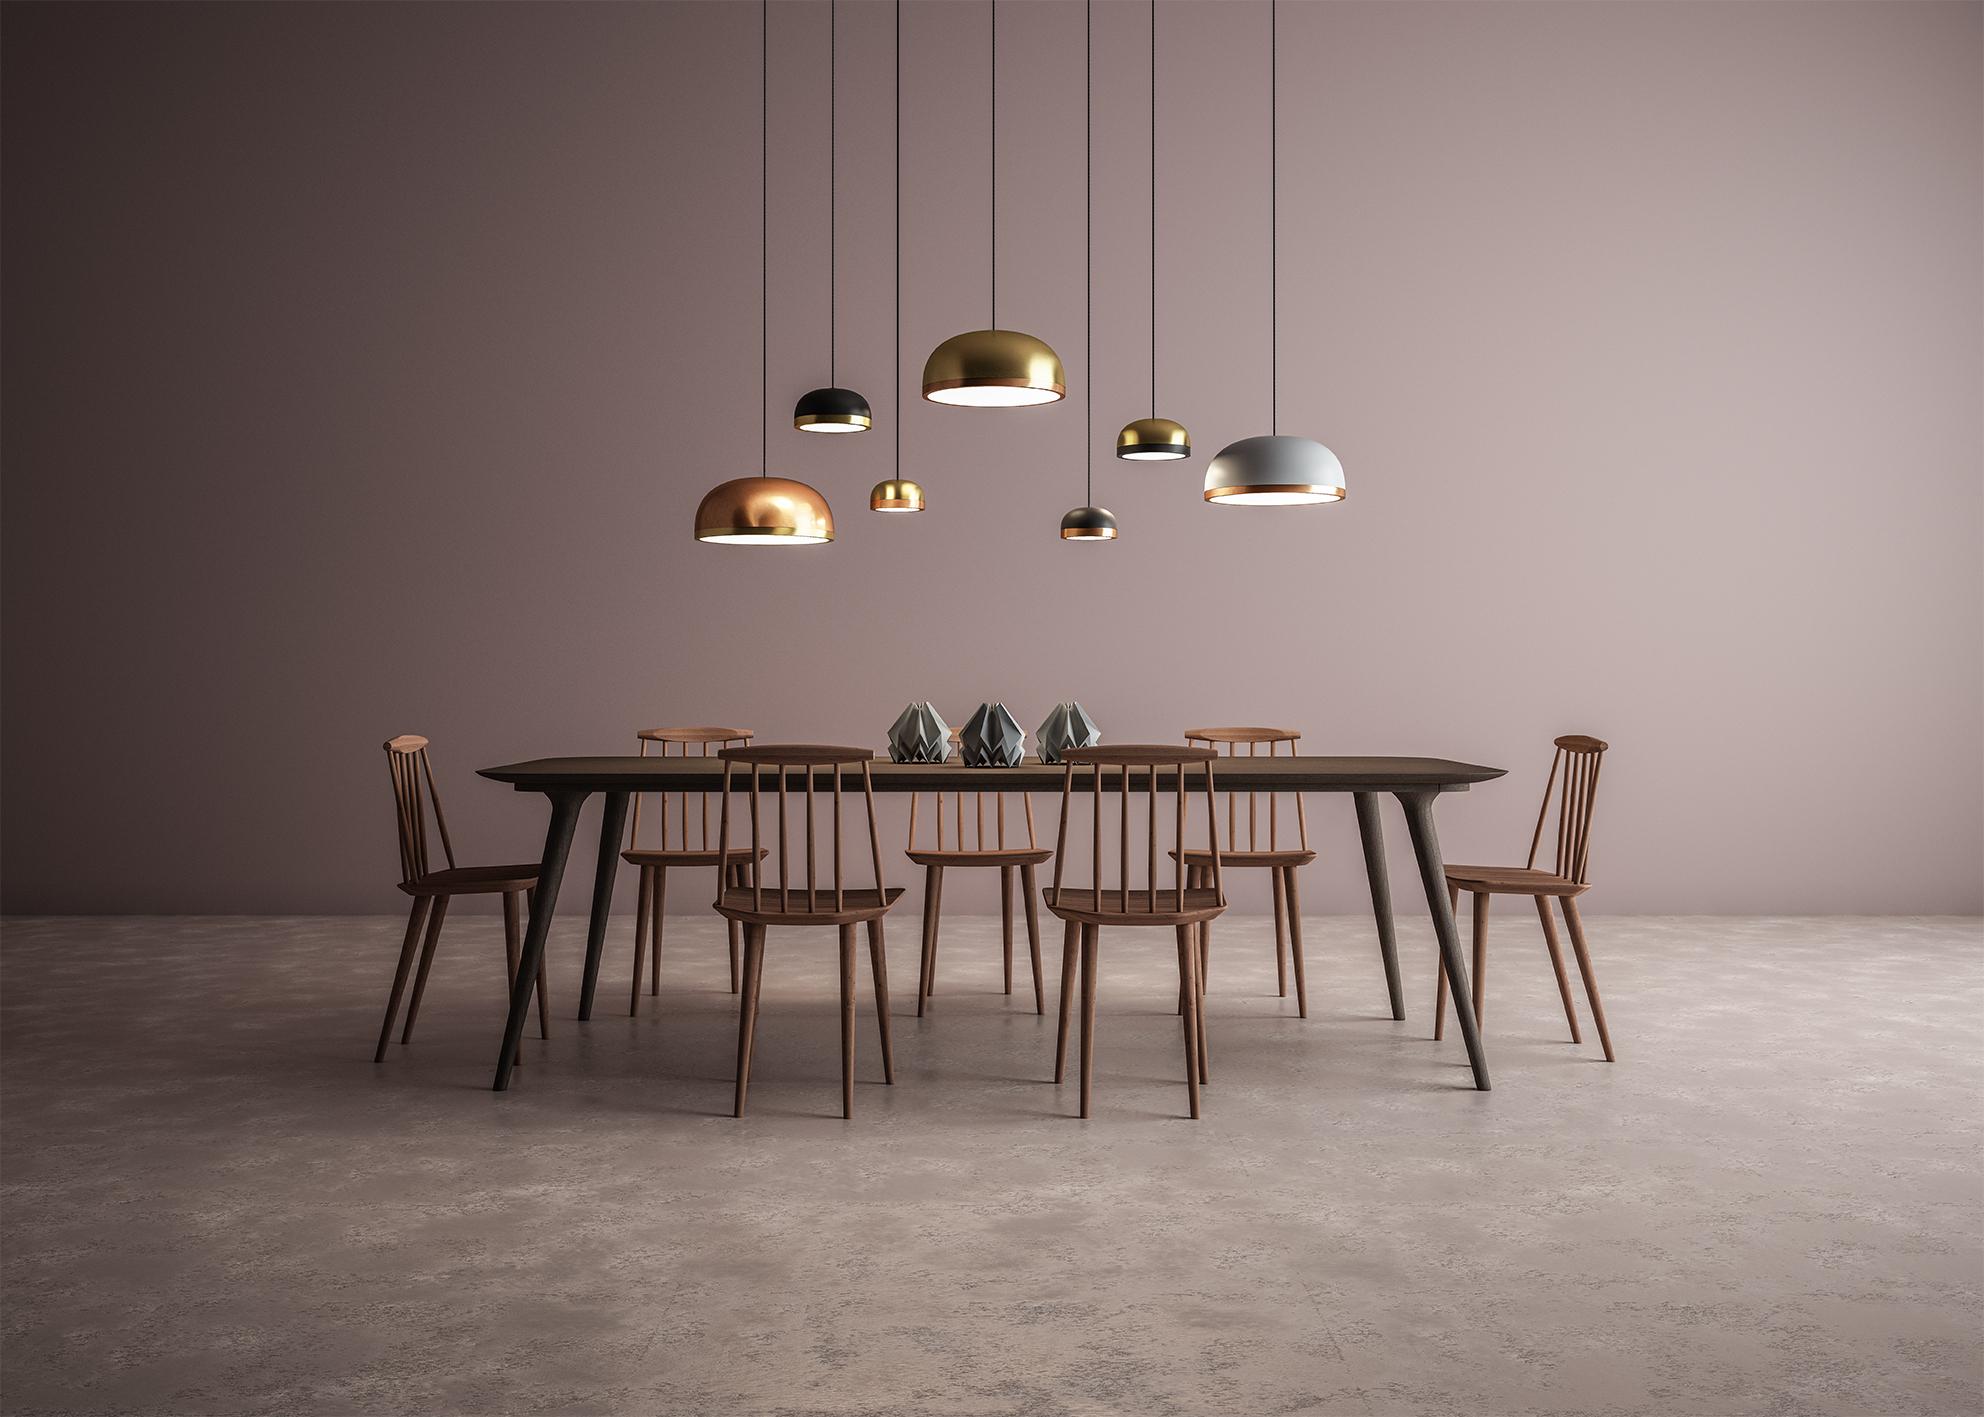 Pendant Lamp Molly 556.22 by TOOY
Designer: Corrado Dotti

Model shown: Copper ring + Brass Dome
Dimensions: H. 17 x D. 20 cm
Source light: 1 x LED 220/240V , 1200 lumens,  12W Compliant with USA electric system
Adjustable direct light